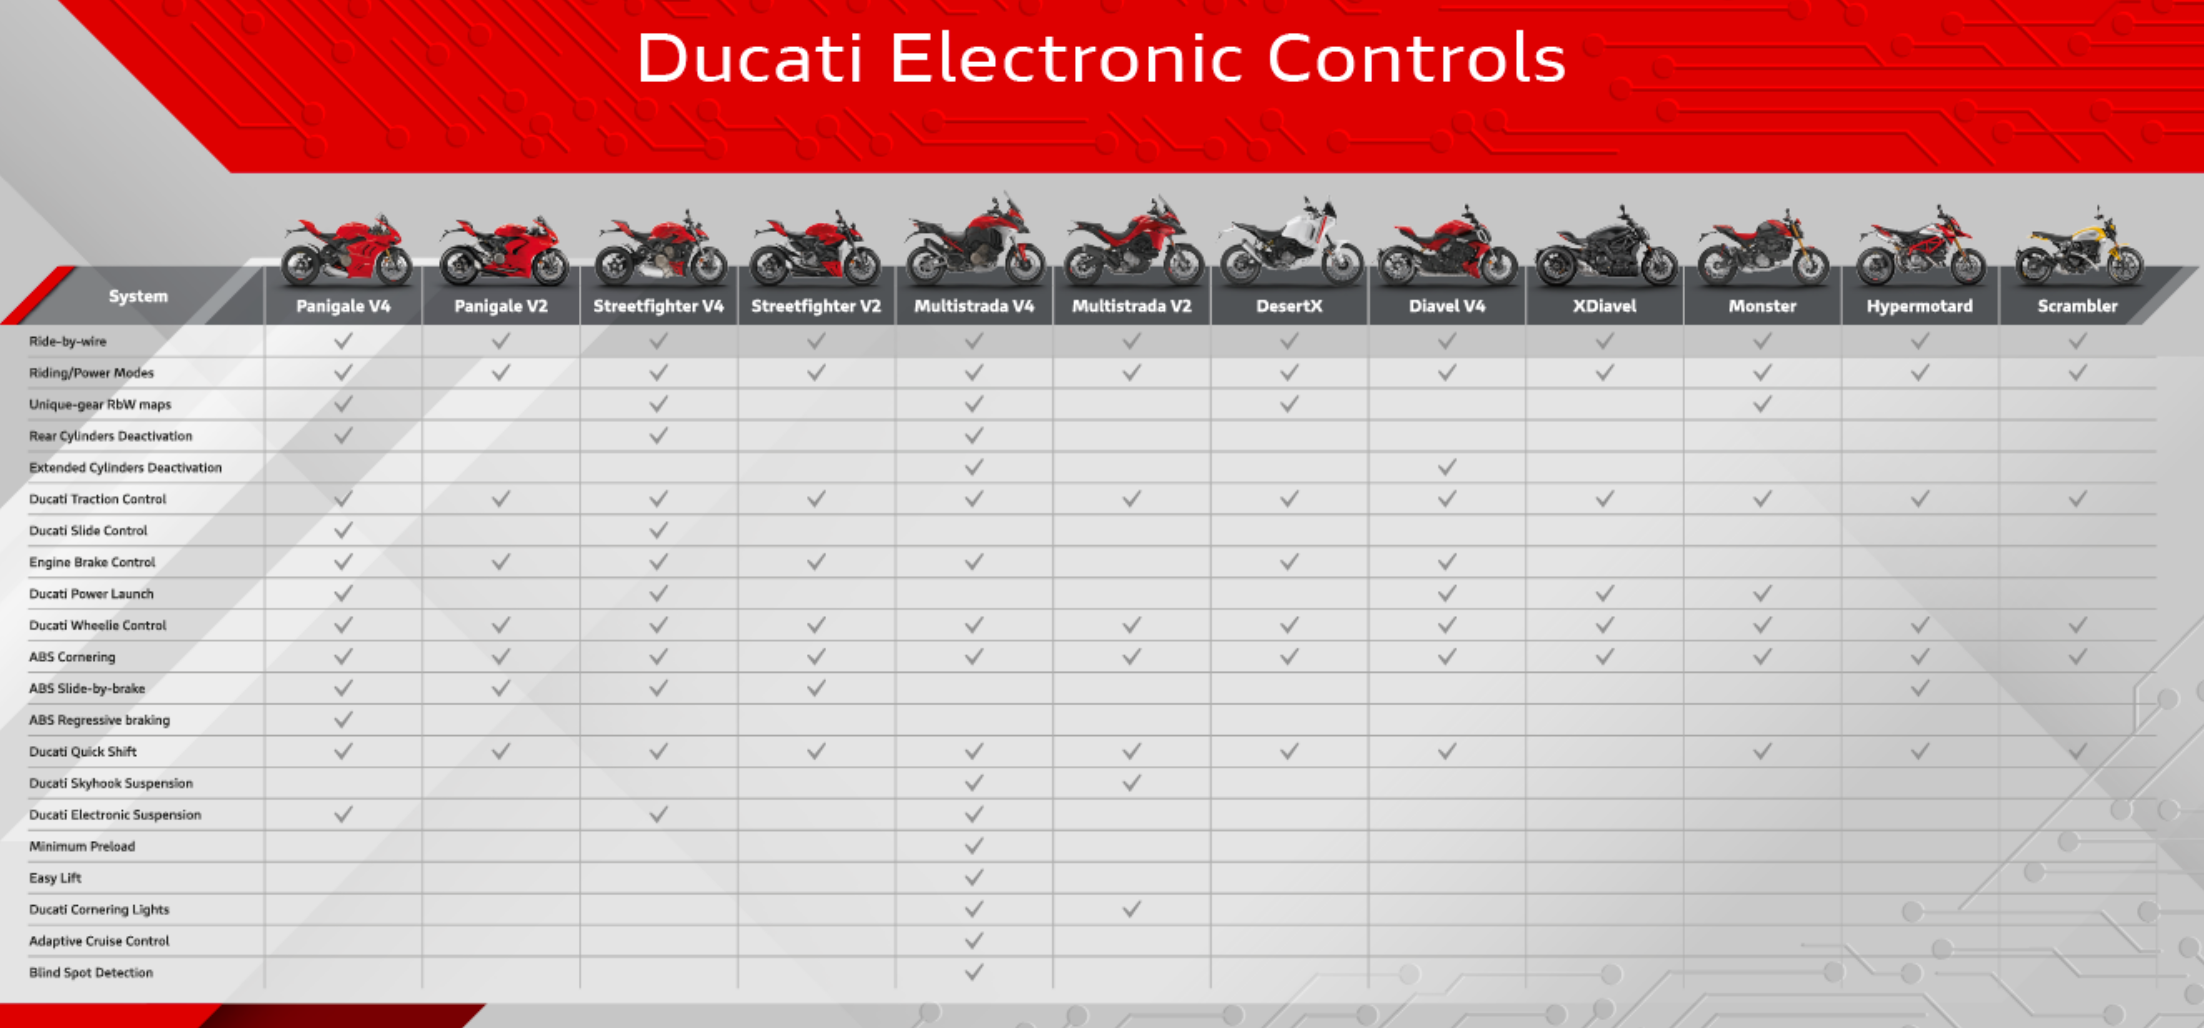 Electronic innovation, the Ducati way